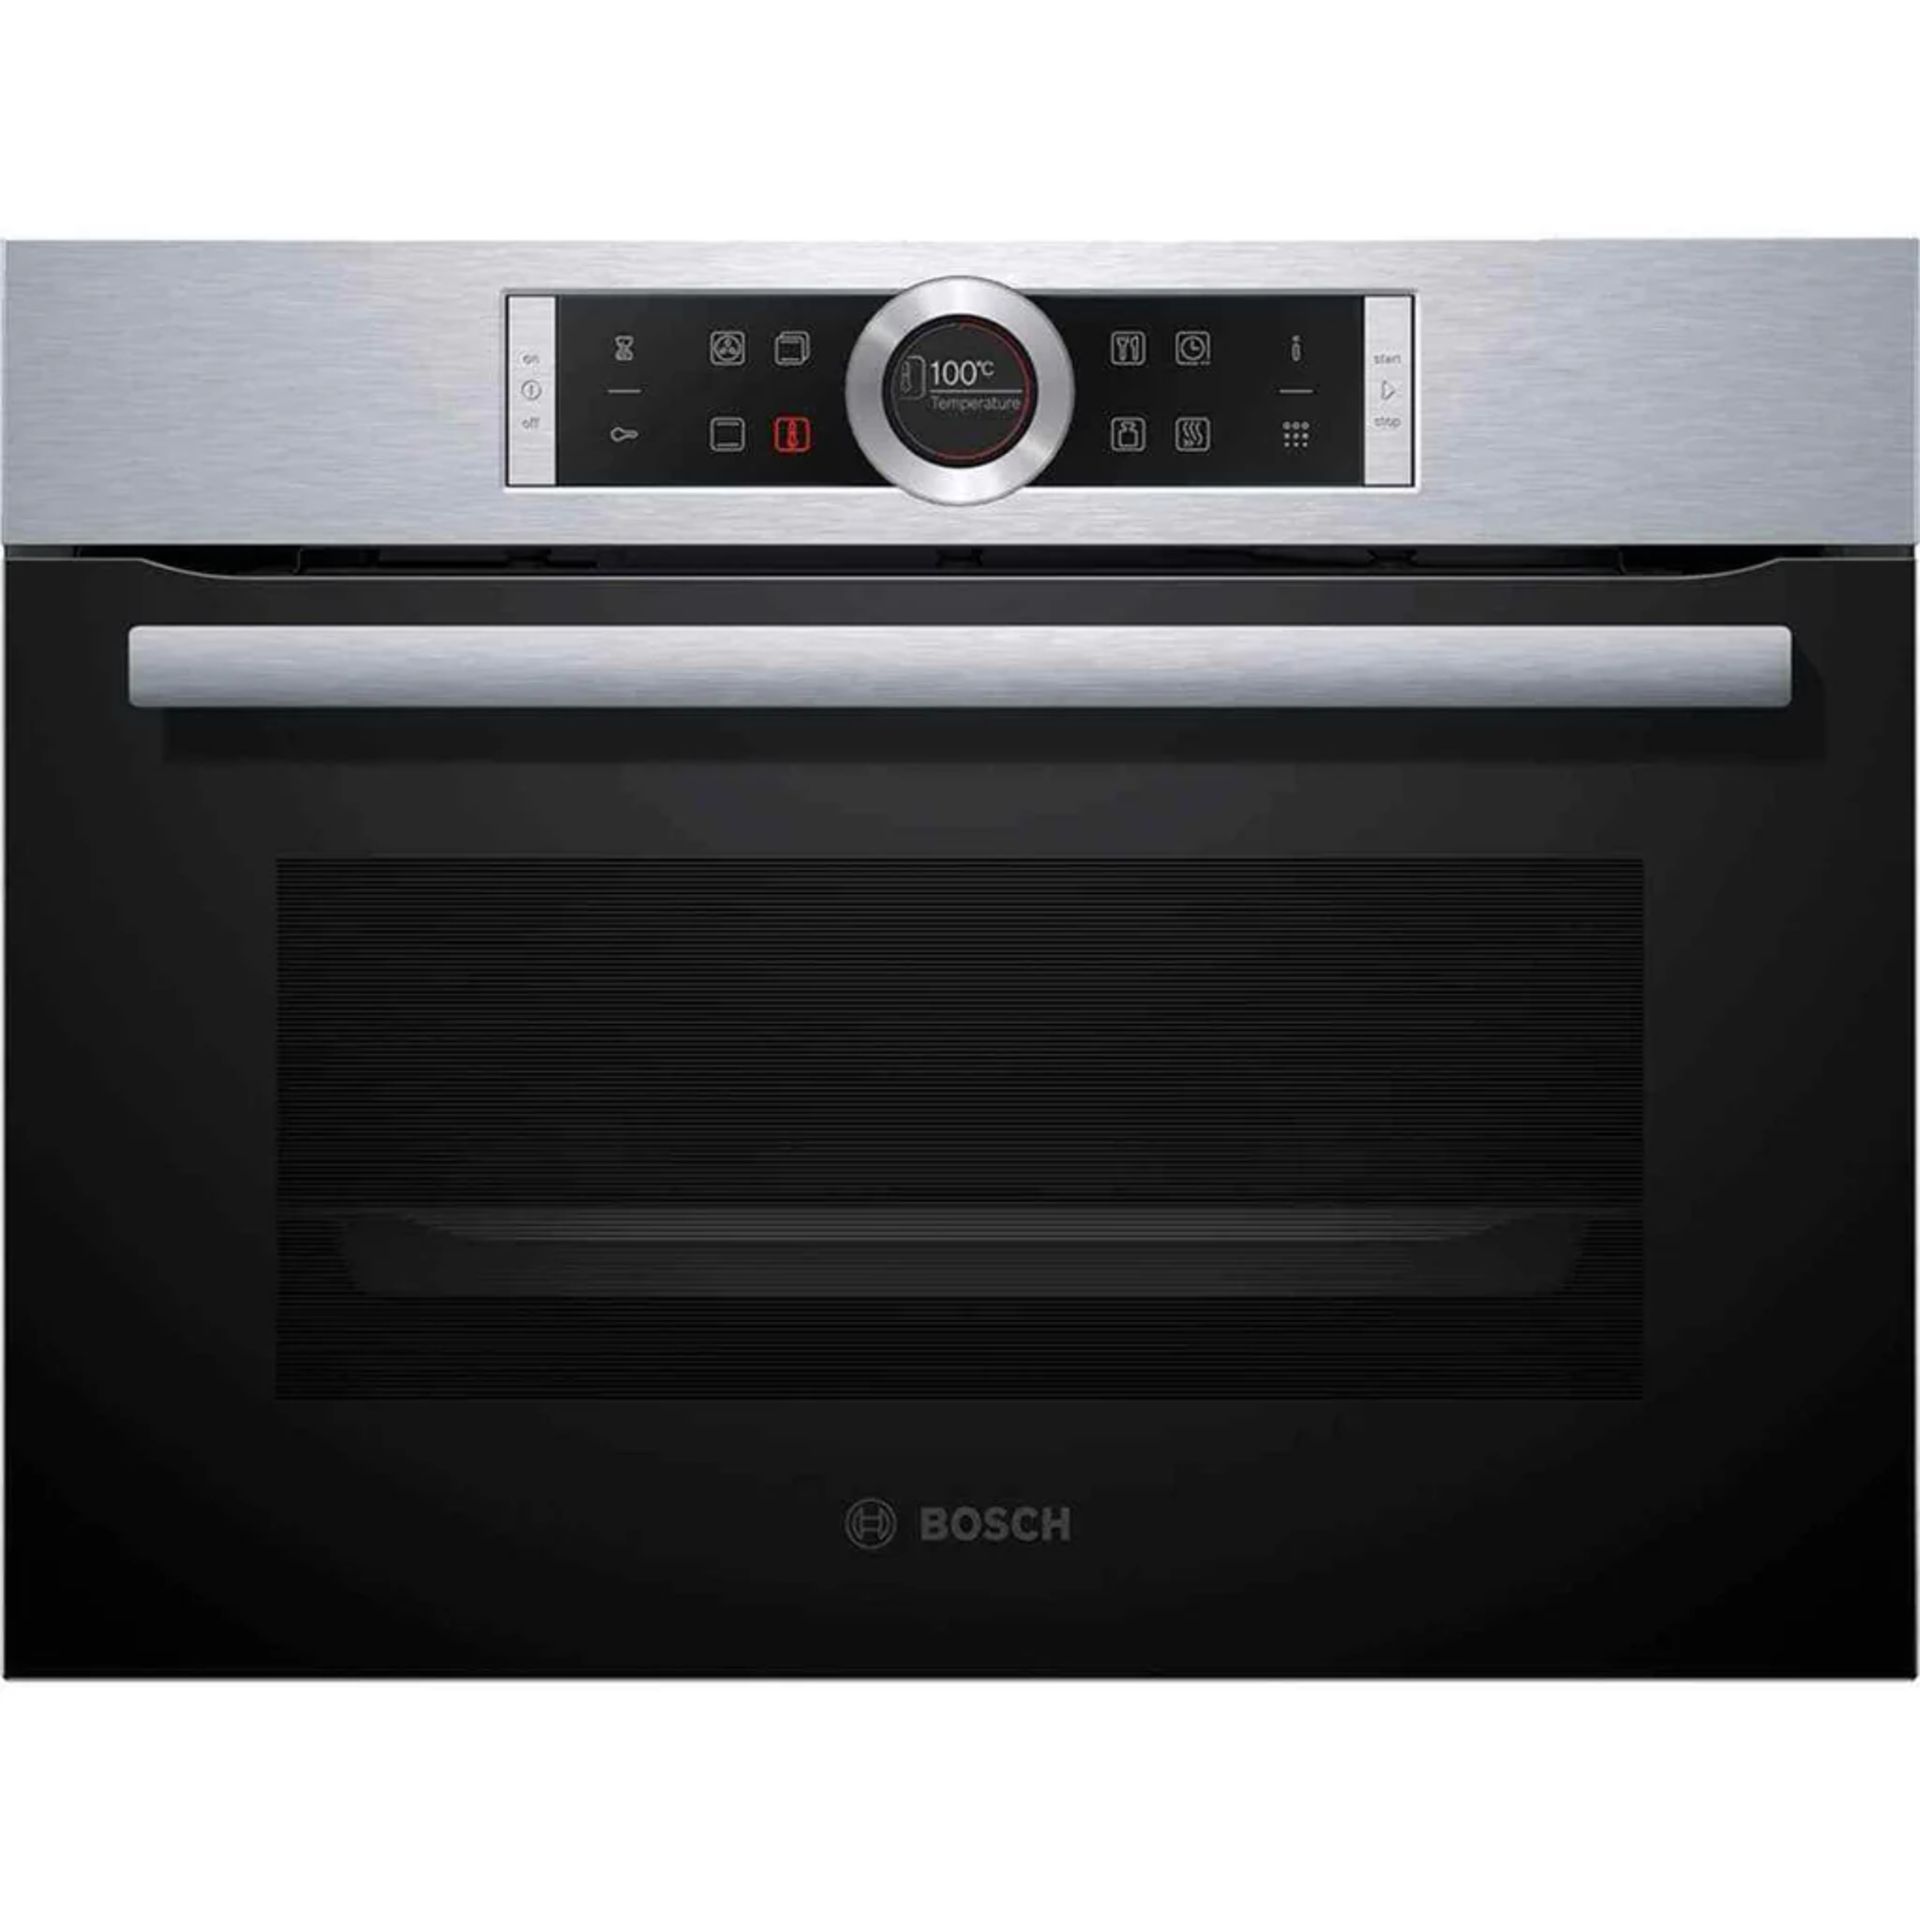 Ex-Display Bosch CBG675BS1B Serie 8 Built In 60cm A+ Electric Single Oven Brushed Steel RRP £720